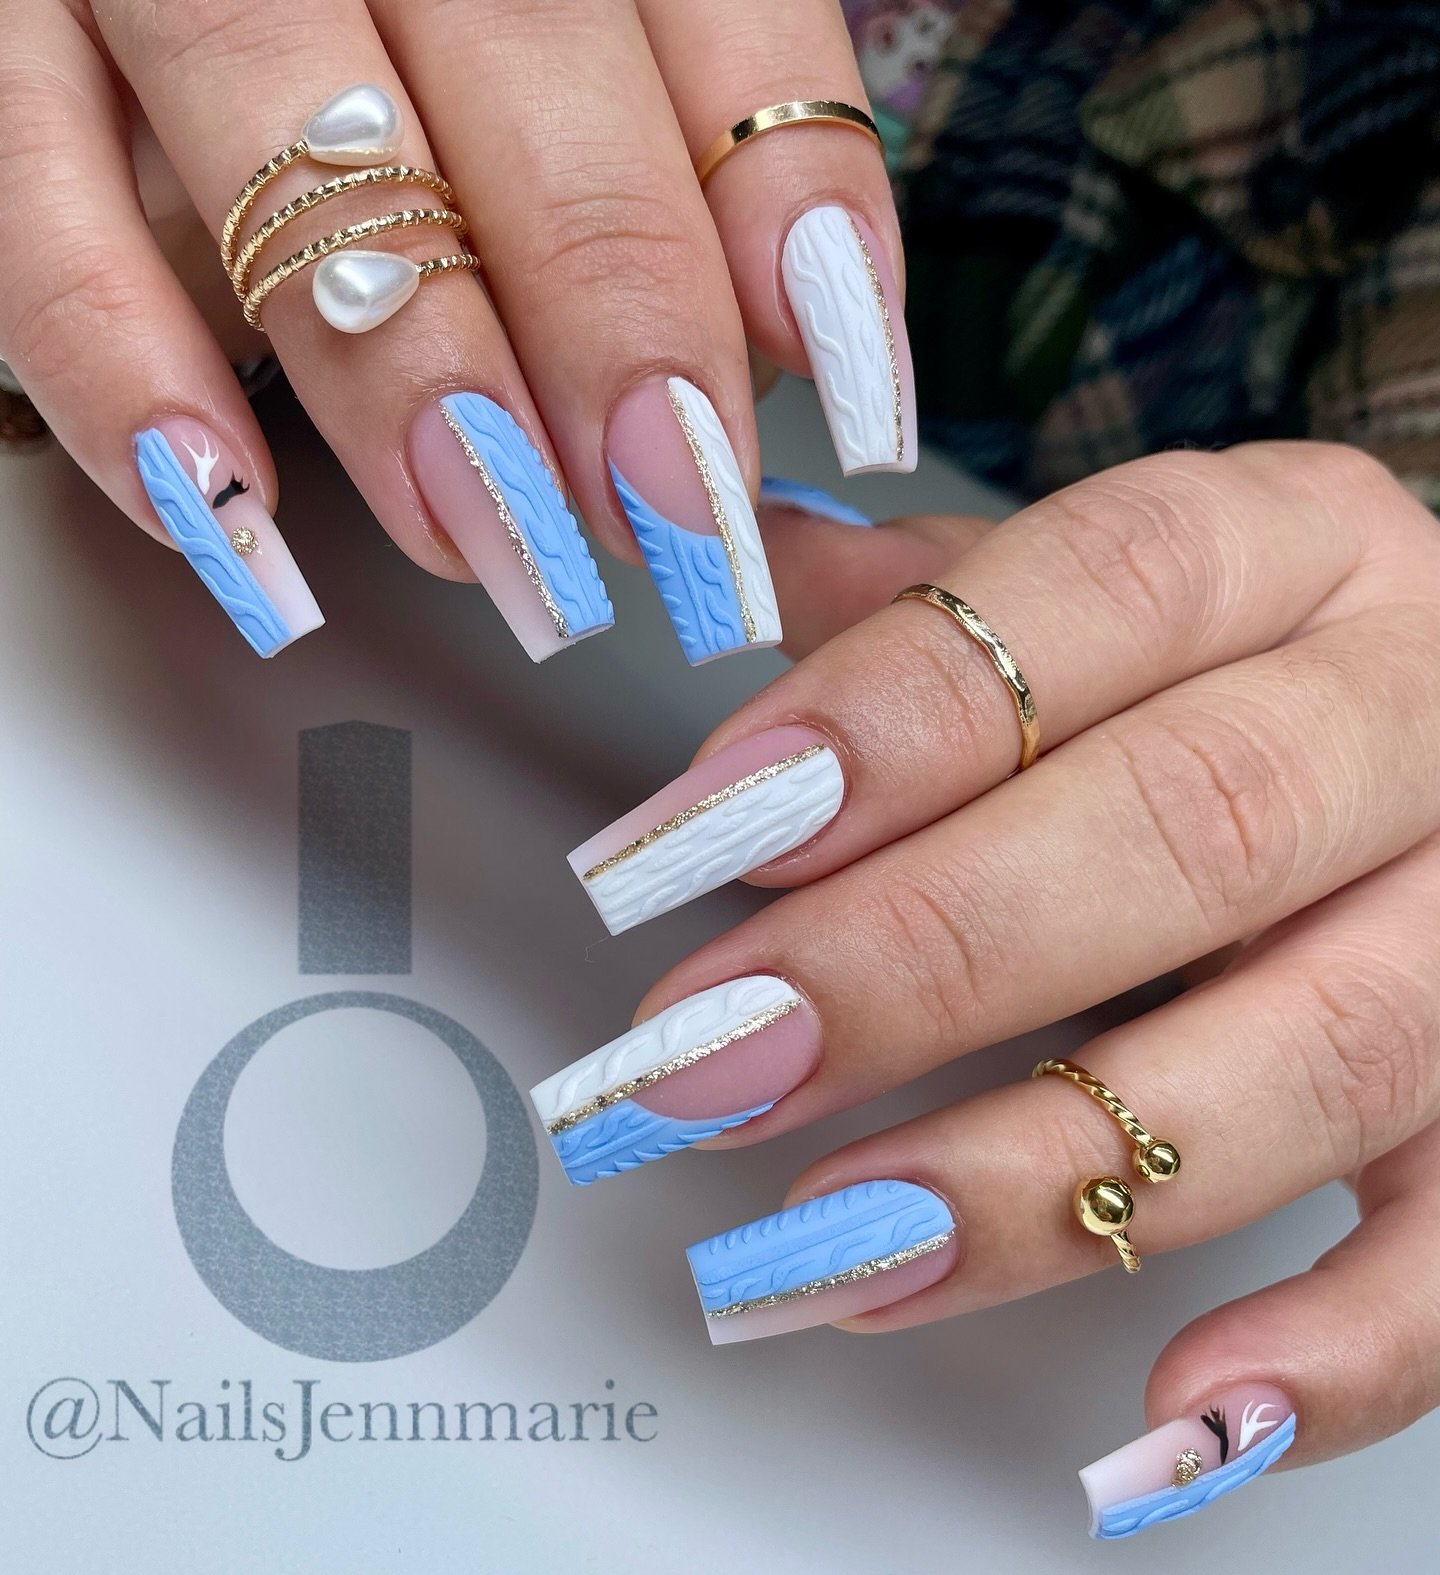 17 - Picture of Acrylic Nails